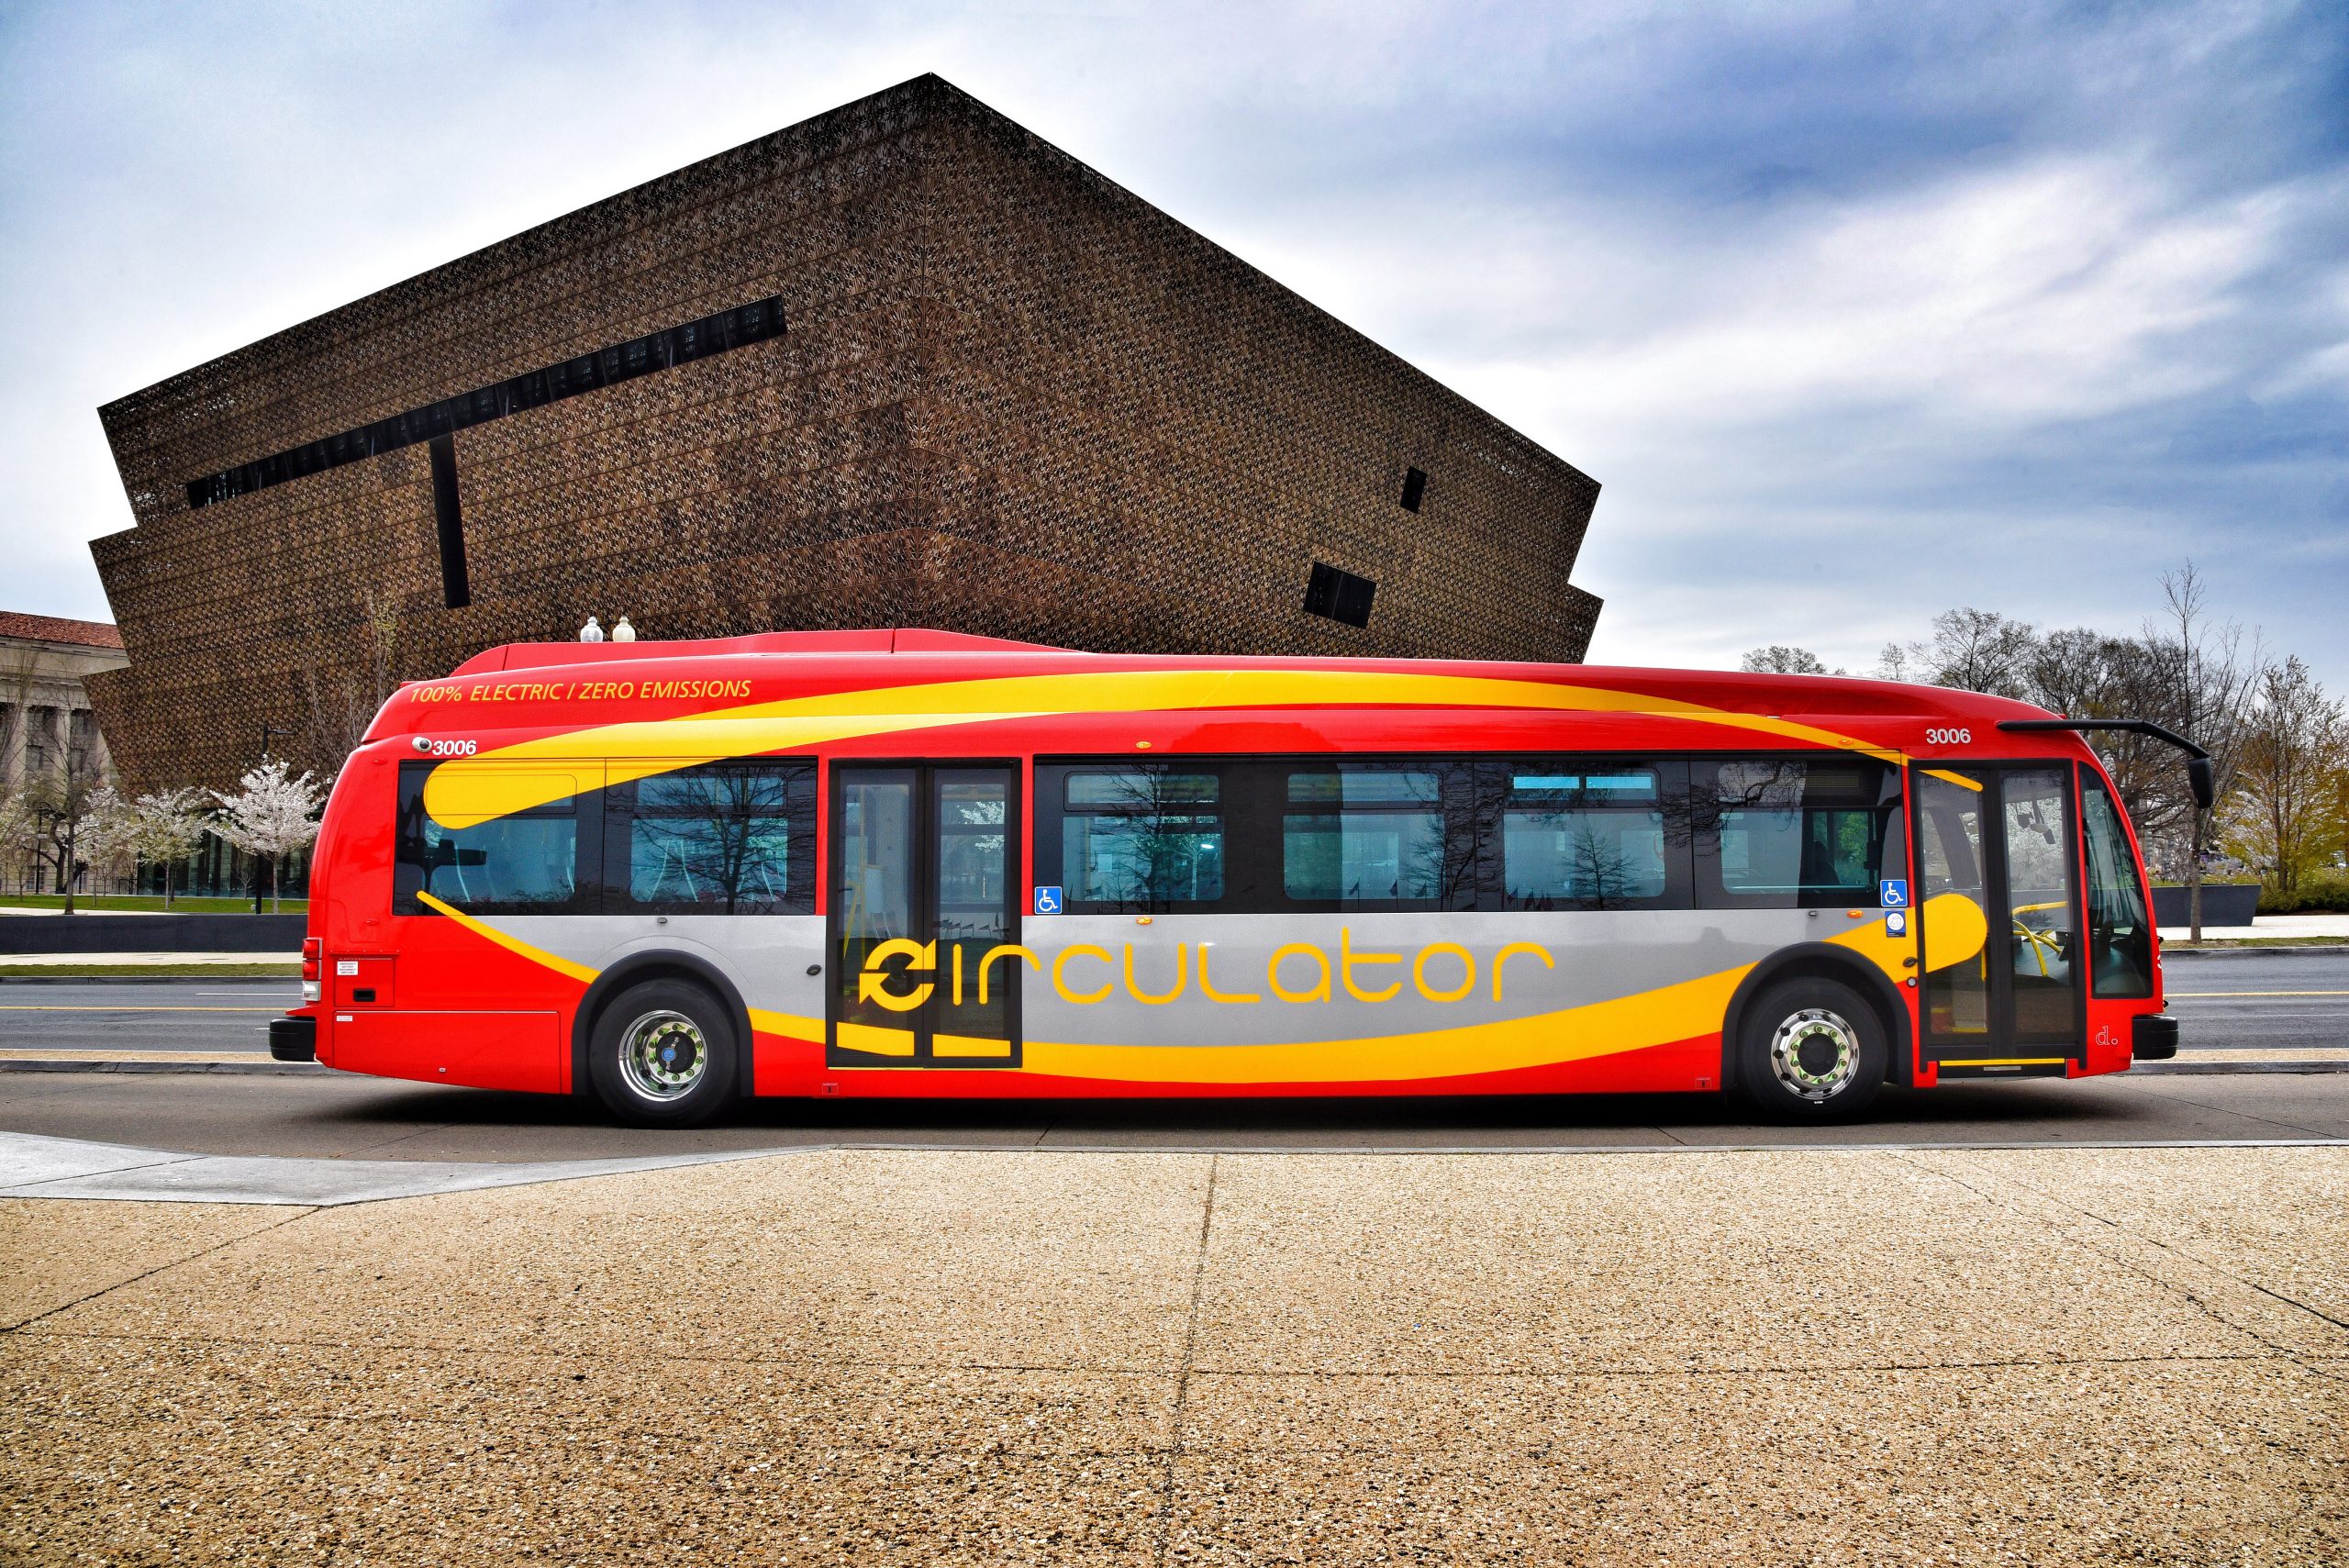 NEWS | £2.4 million set to be spent on ‘City Zipper’ project to deliver electric buses and an improved service in Hereford